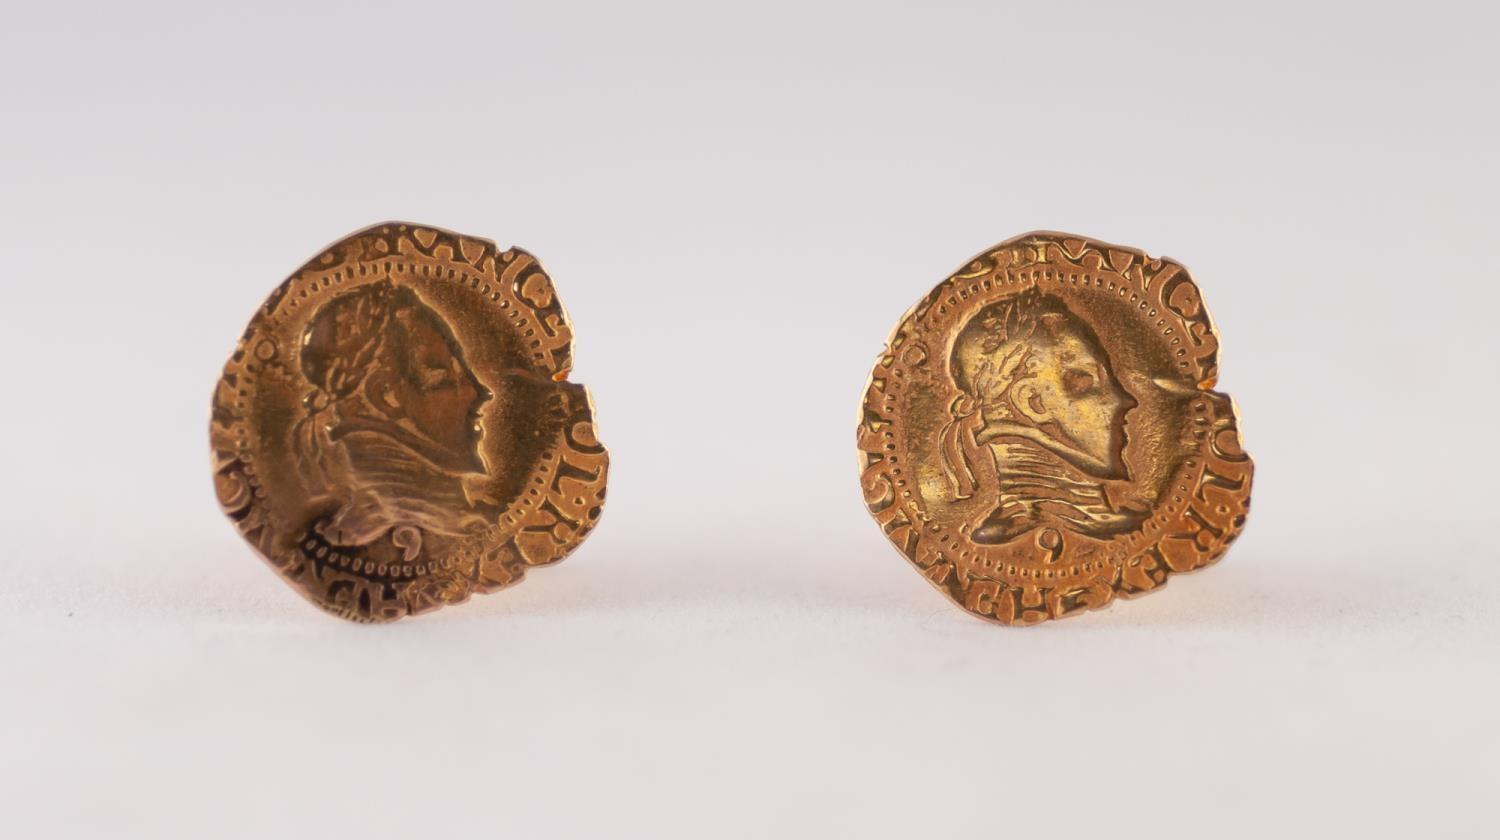 PAIR OF HENRY III OF FRANCE GOLD COINS AS CUFFLINKS, mounted on gilt metal fittings, 7.25gms gross